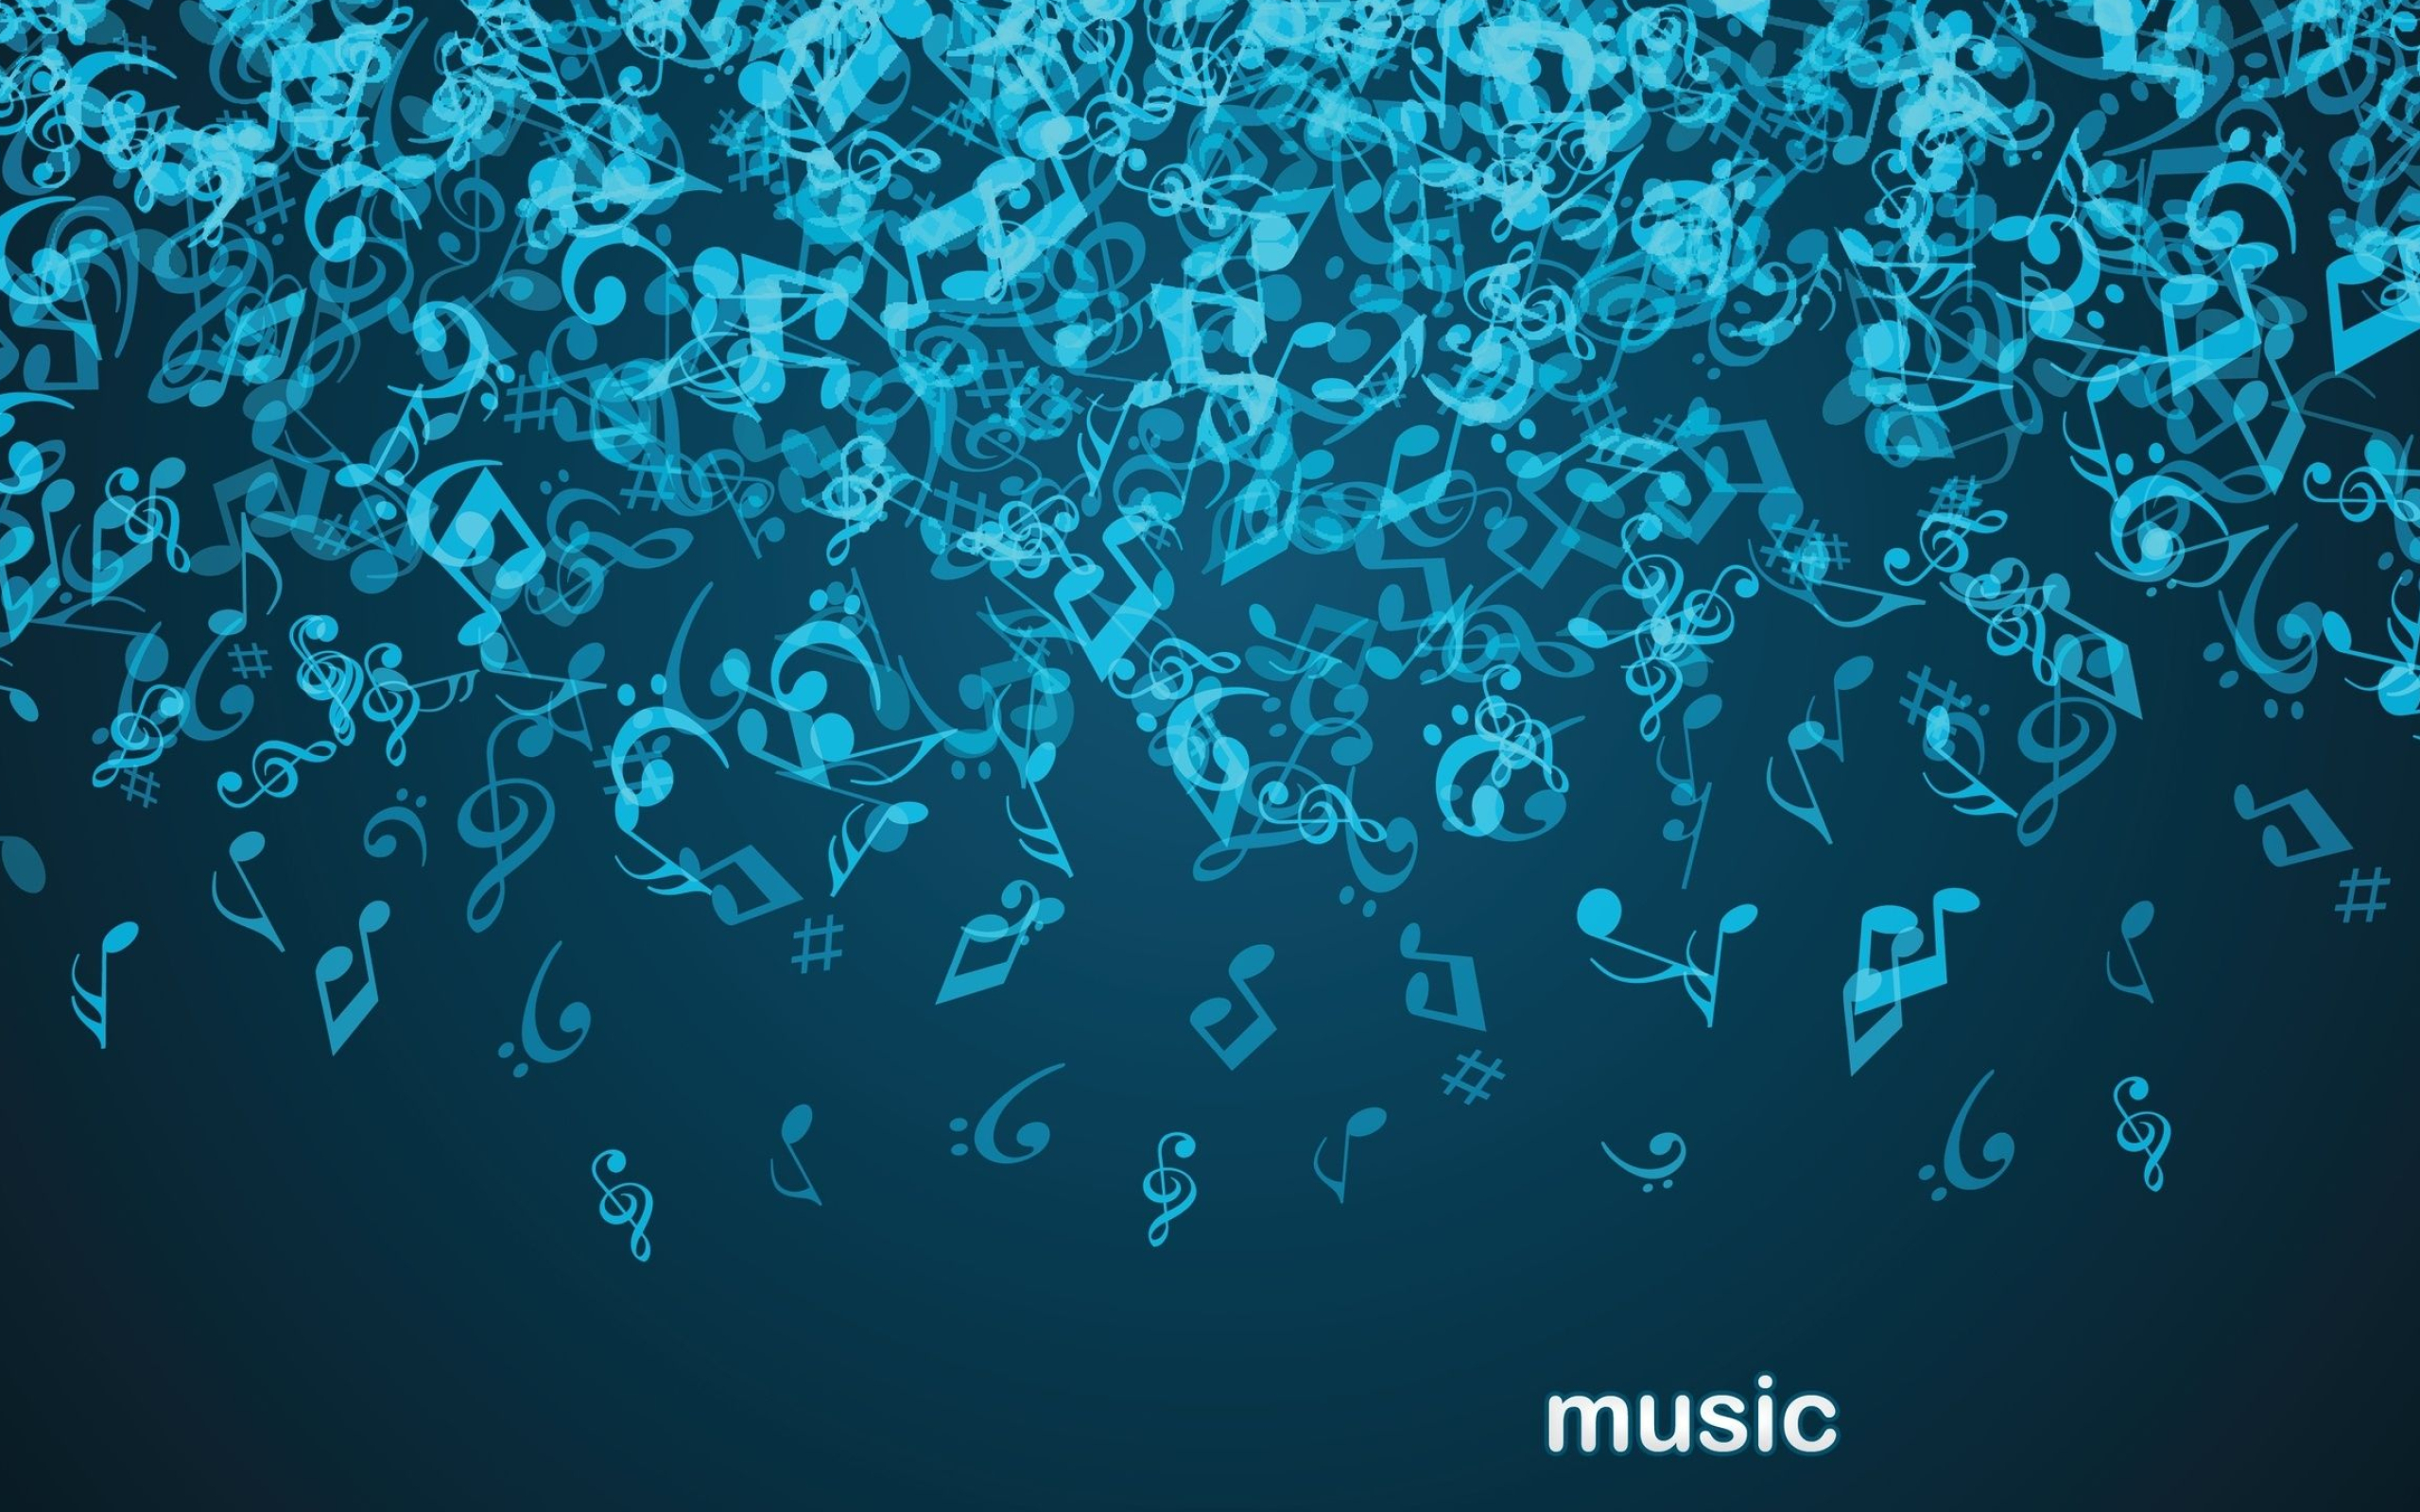 2560x1600 10 Top Music Note Wallpaper Hd FULL HD 1080p For PC Desktop | Music wallpaper, Trap music wallpaper, Music notes